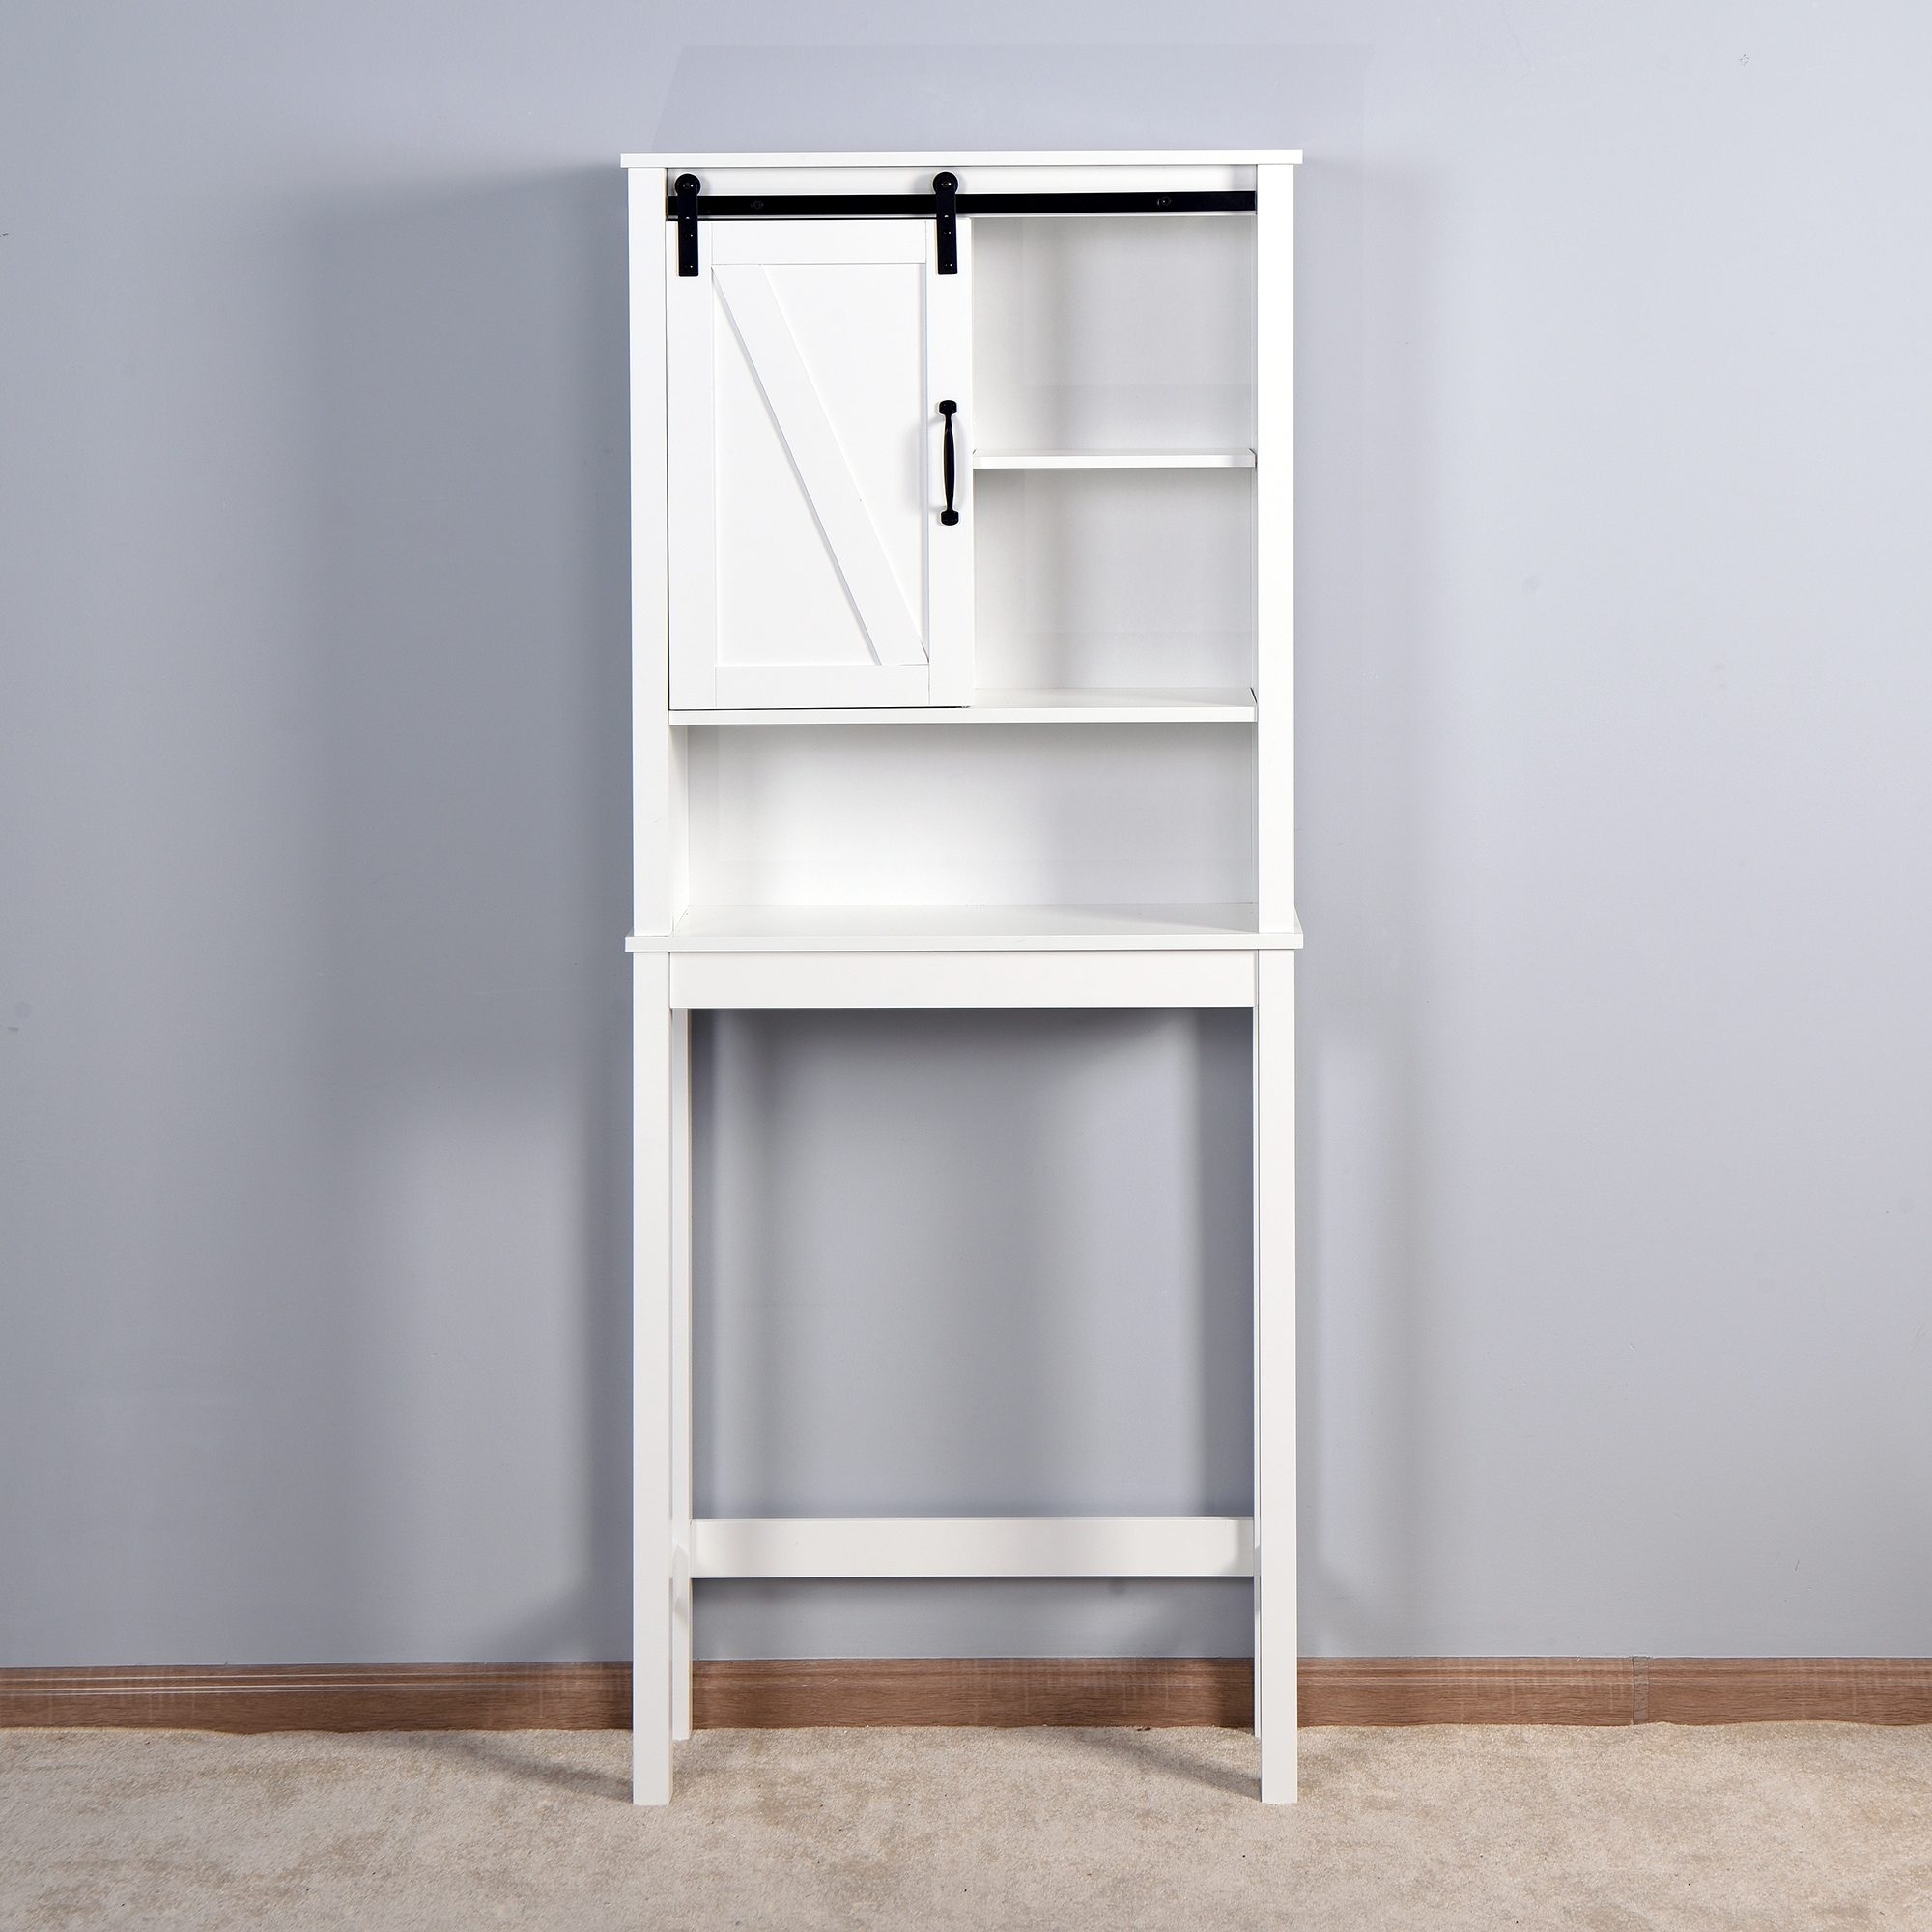 Over The Toilet Storage Cabinet with Adjustable Shelf